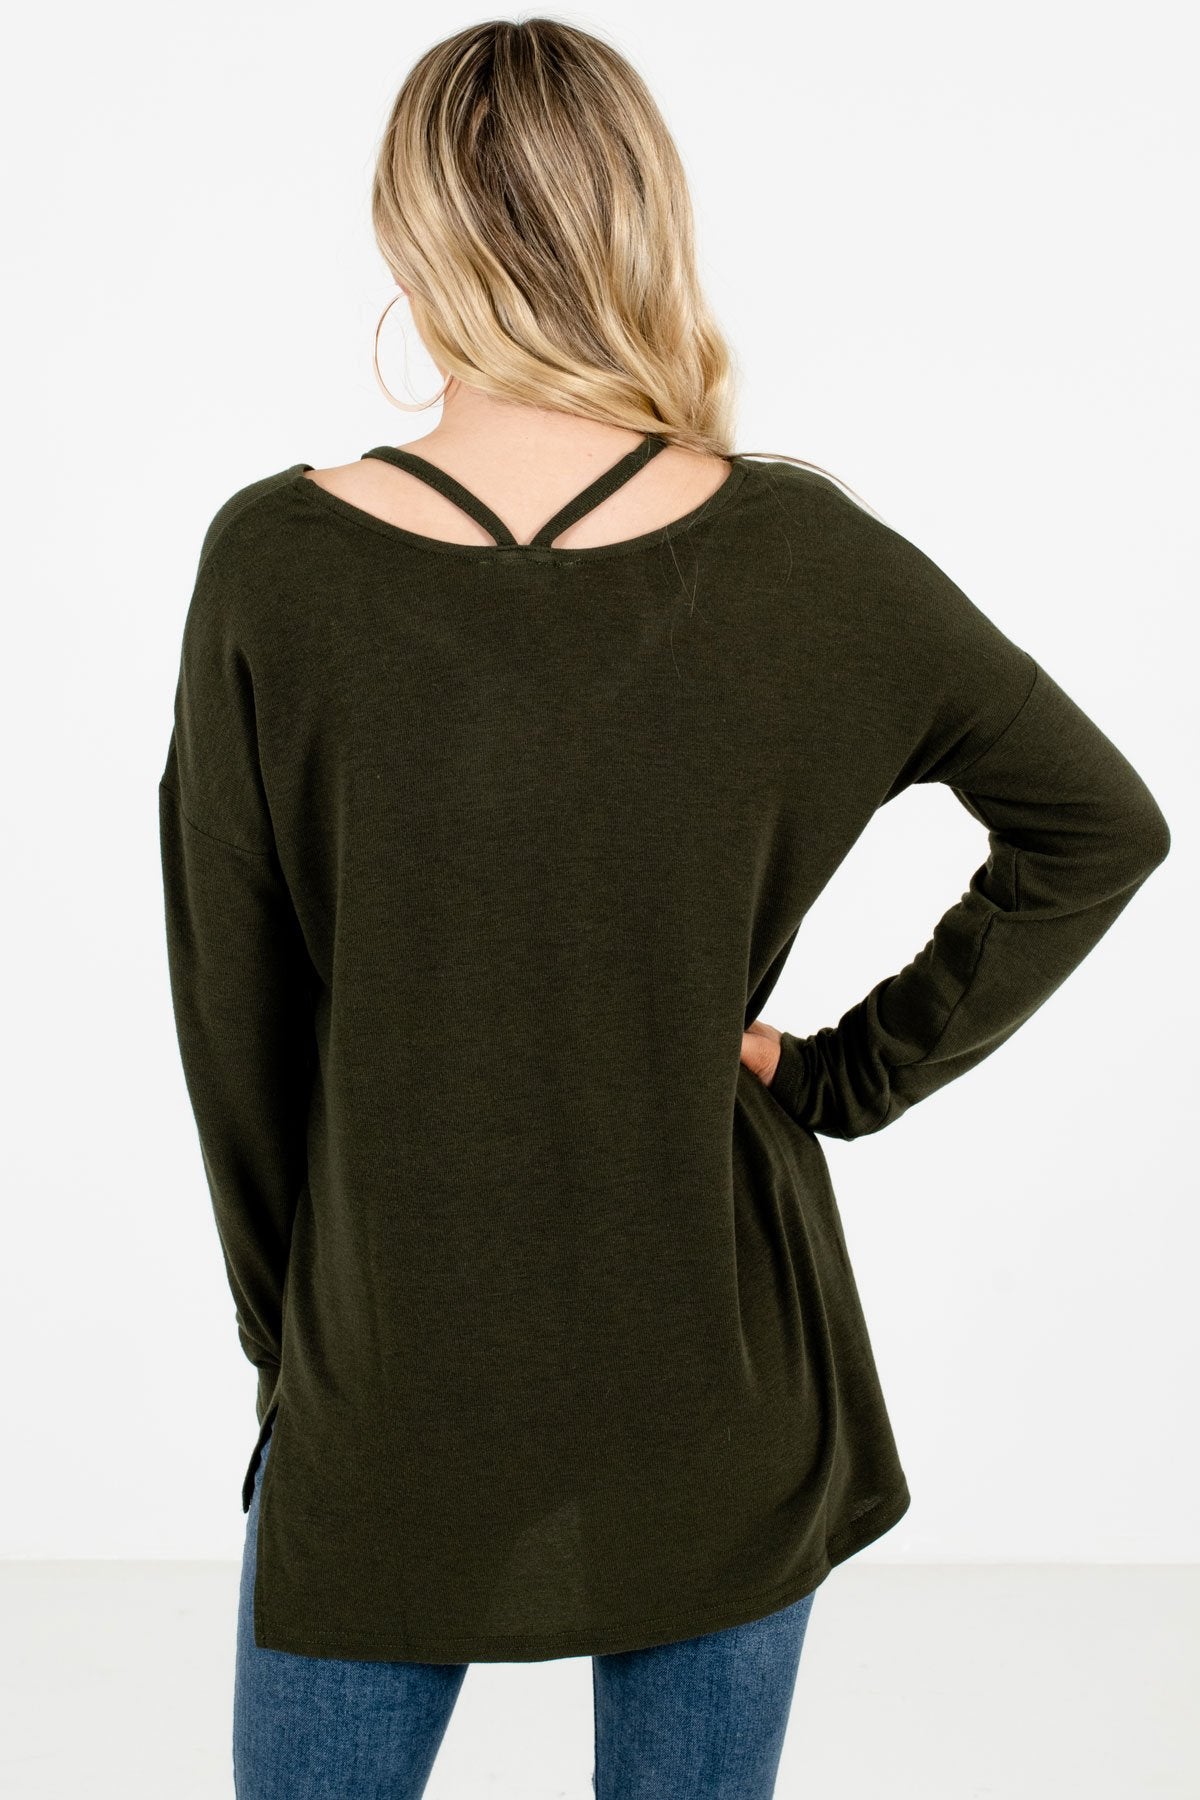 Women’s Olive Green Cutout Detailed Boutique Top